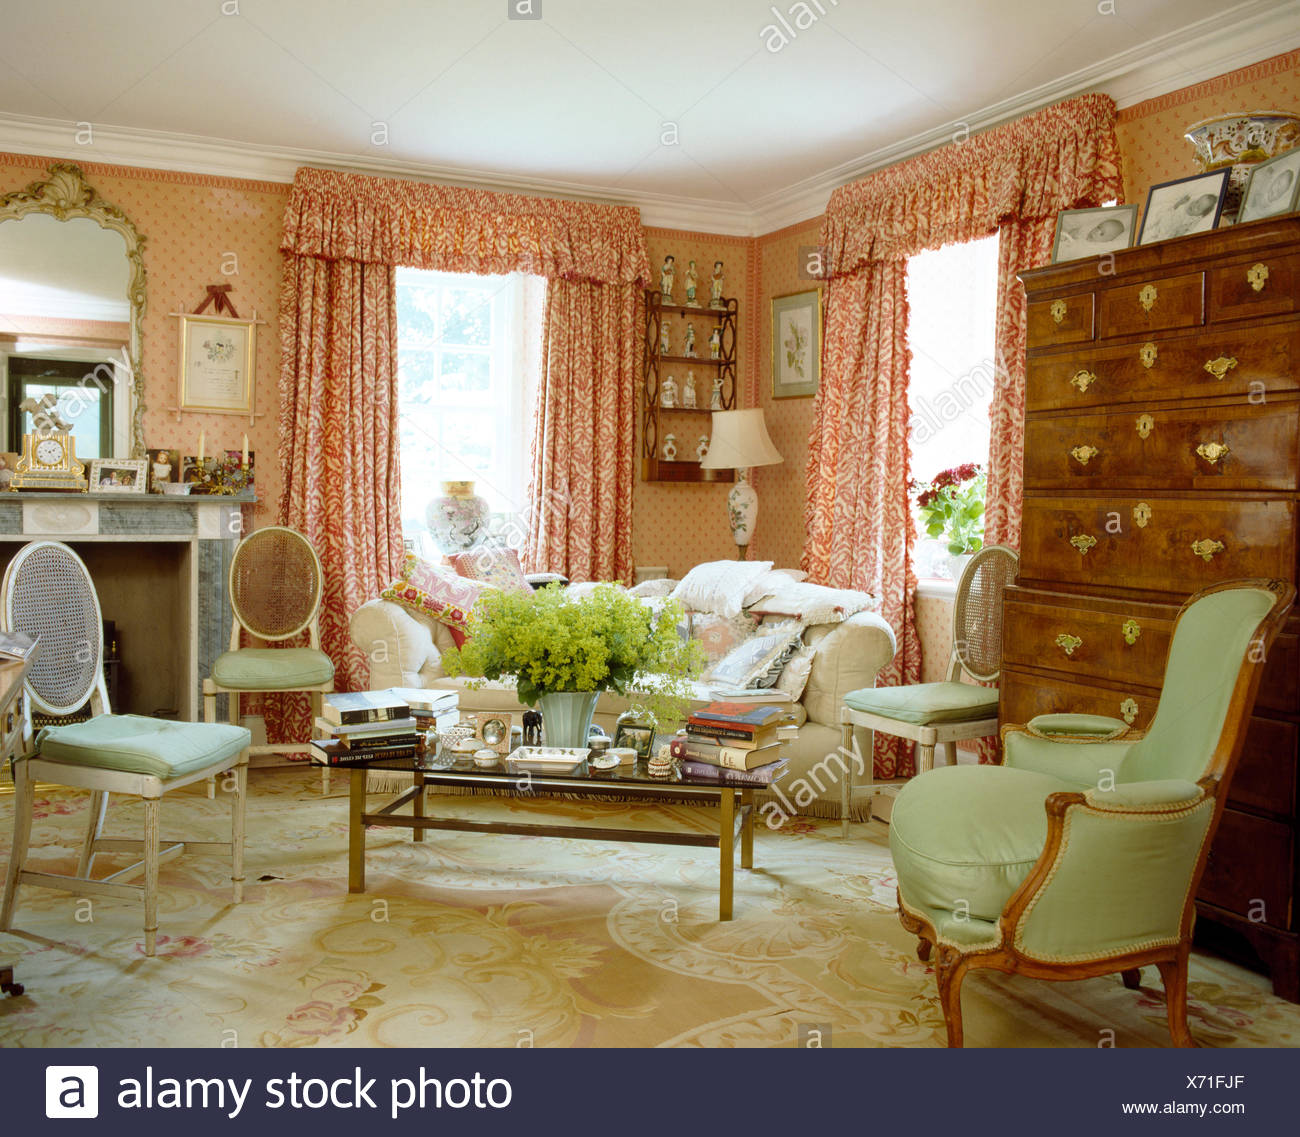 Red White Curtains In Pink Country Living Room With Antique Balloon Back Chairs And Comfortable Armchair And Sofa Stock Photo Alamy